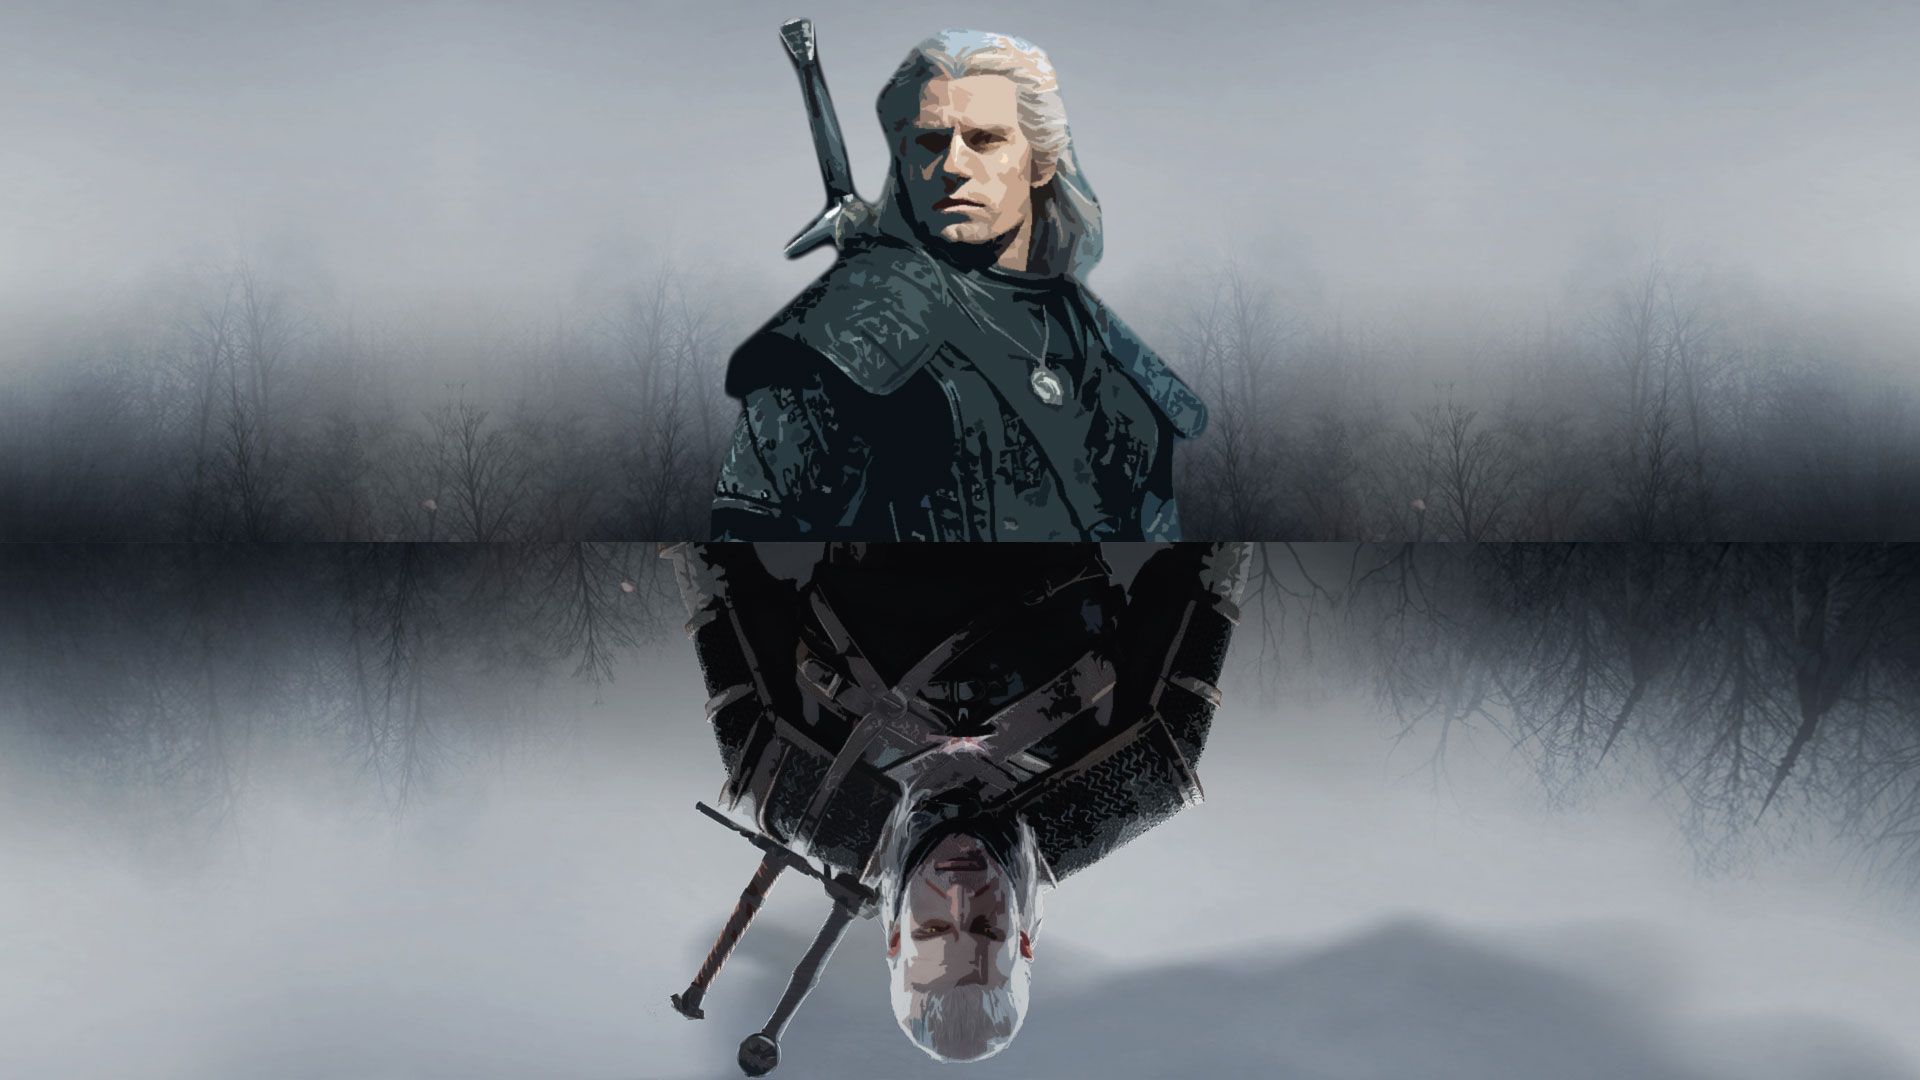 Cool Netflix The Witcher Wallpapers